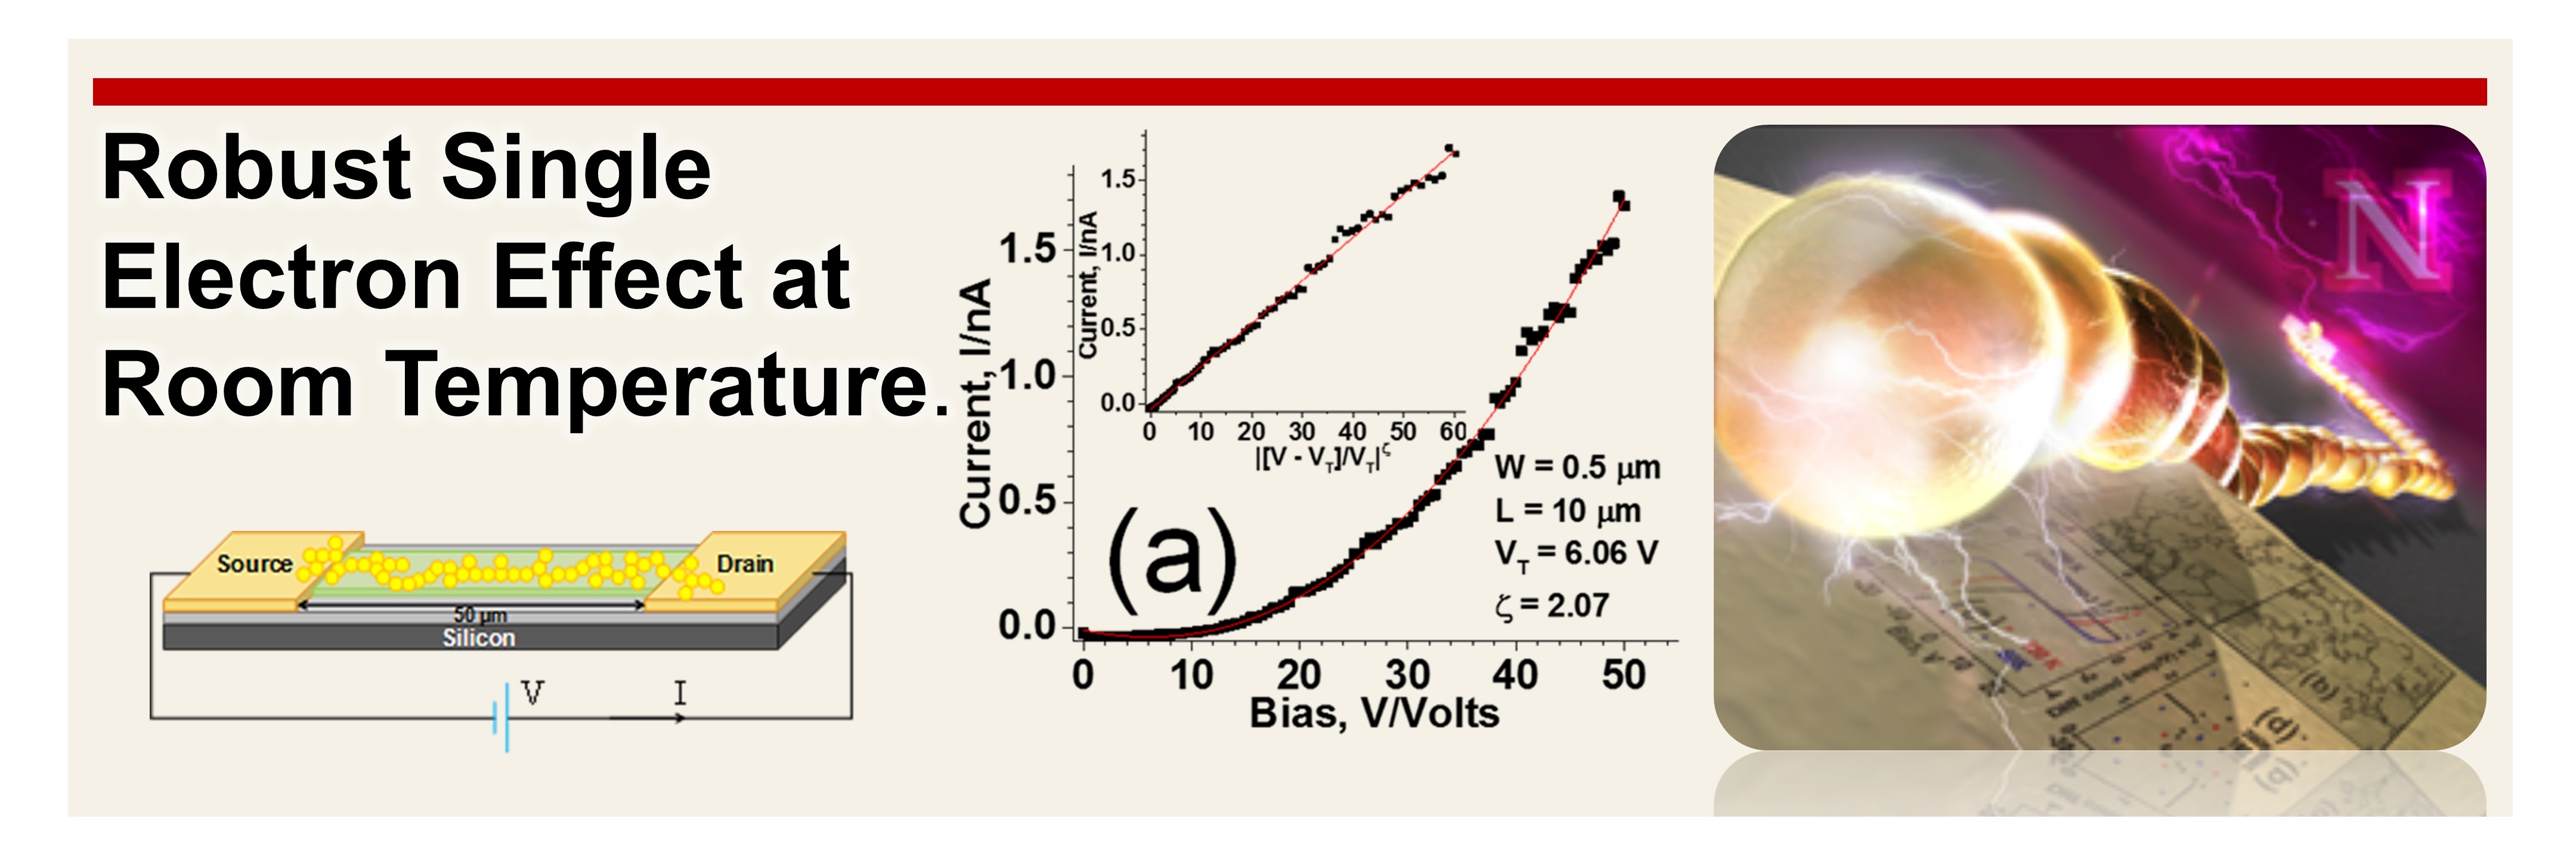 Robust single electron effect at room temperature